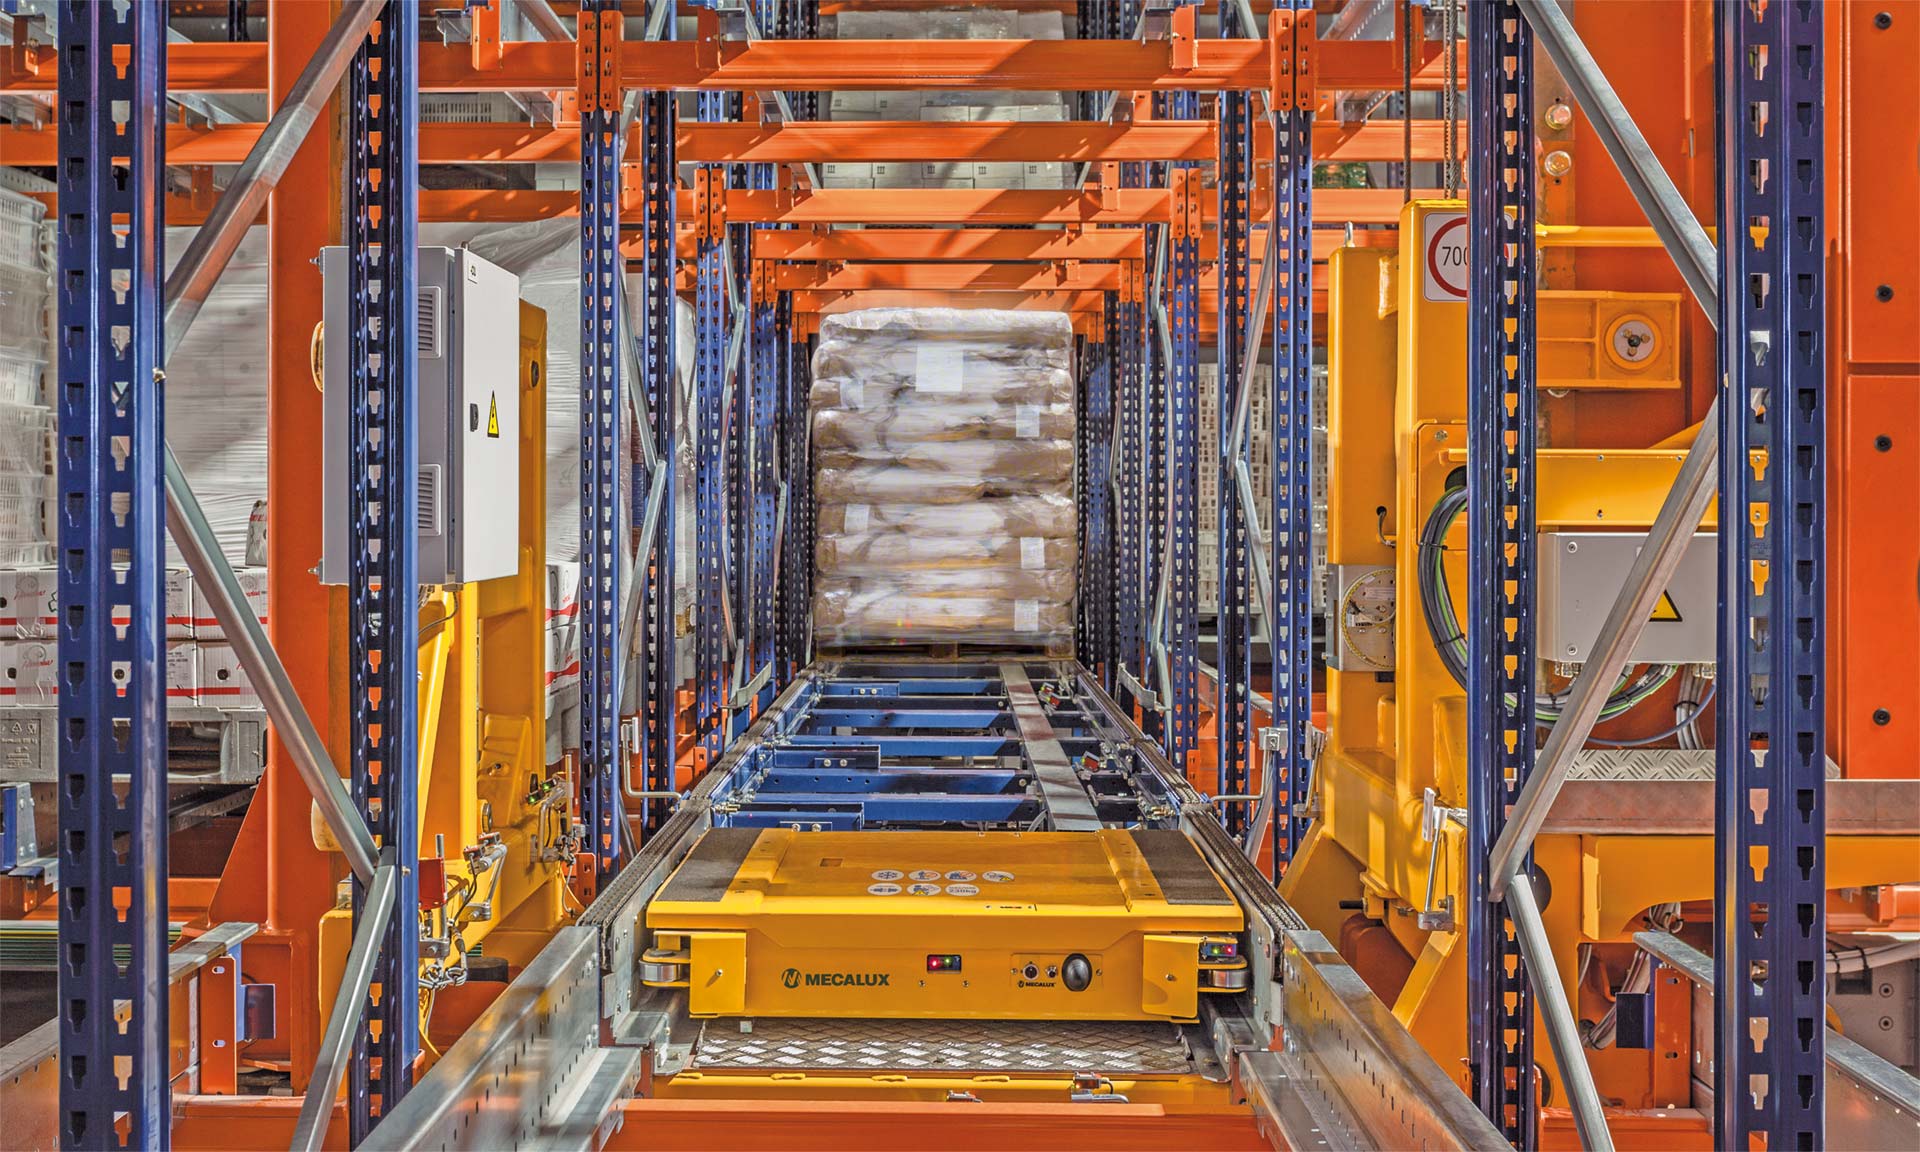 Automated storage facilitates extremely accurate stock control